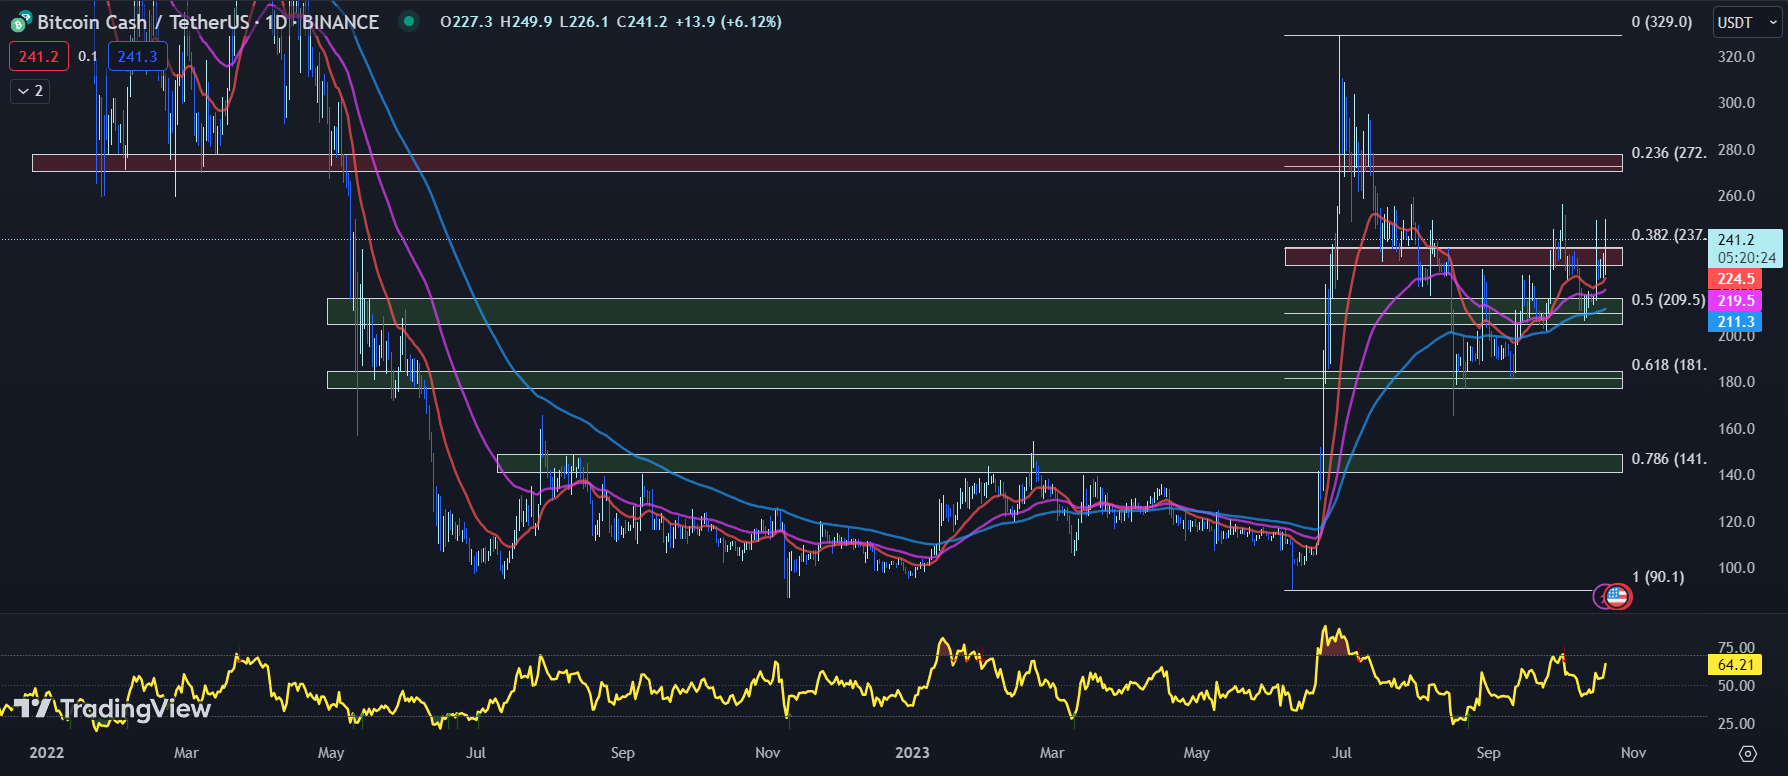 TradingView chart for the BCH price 10-20-23